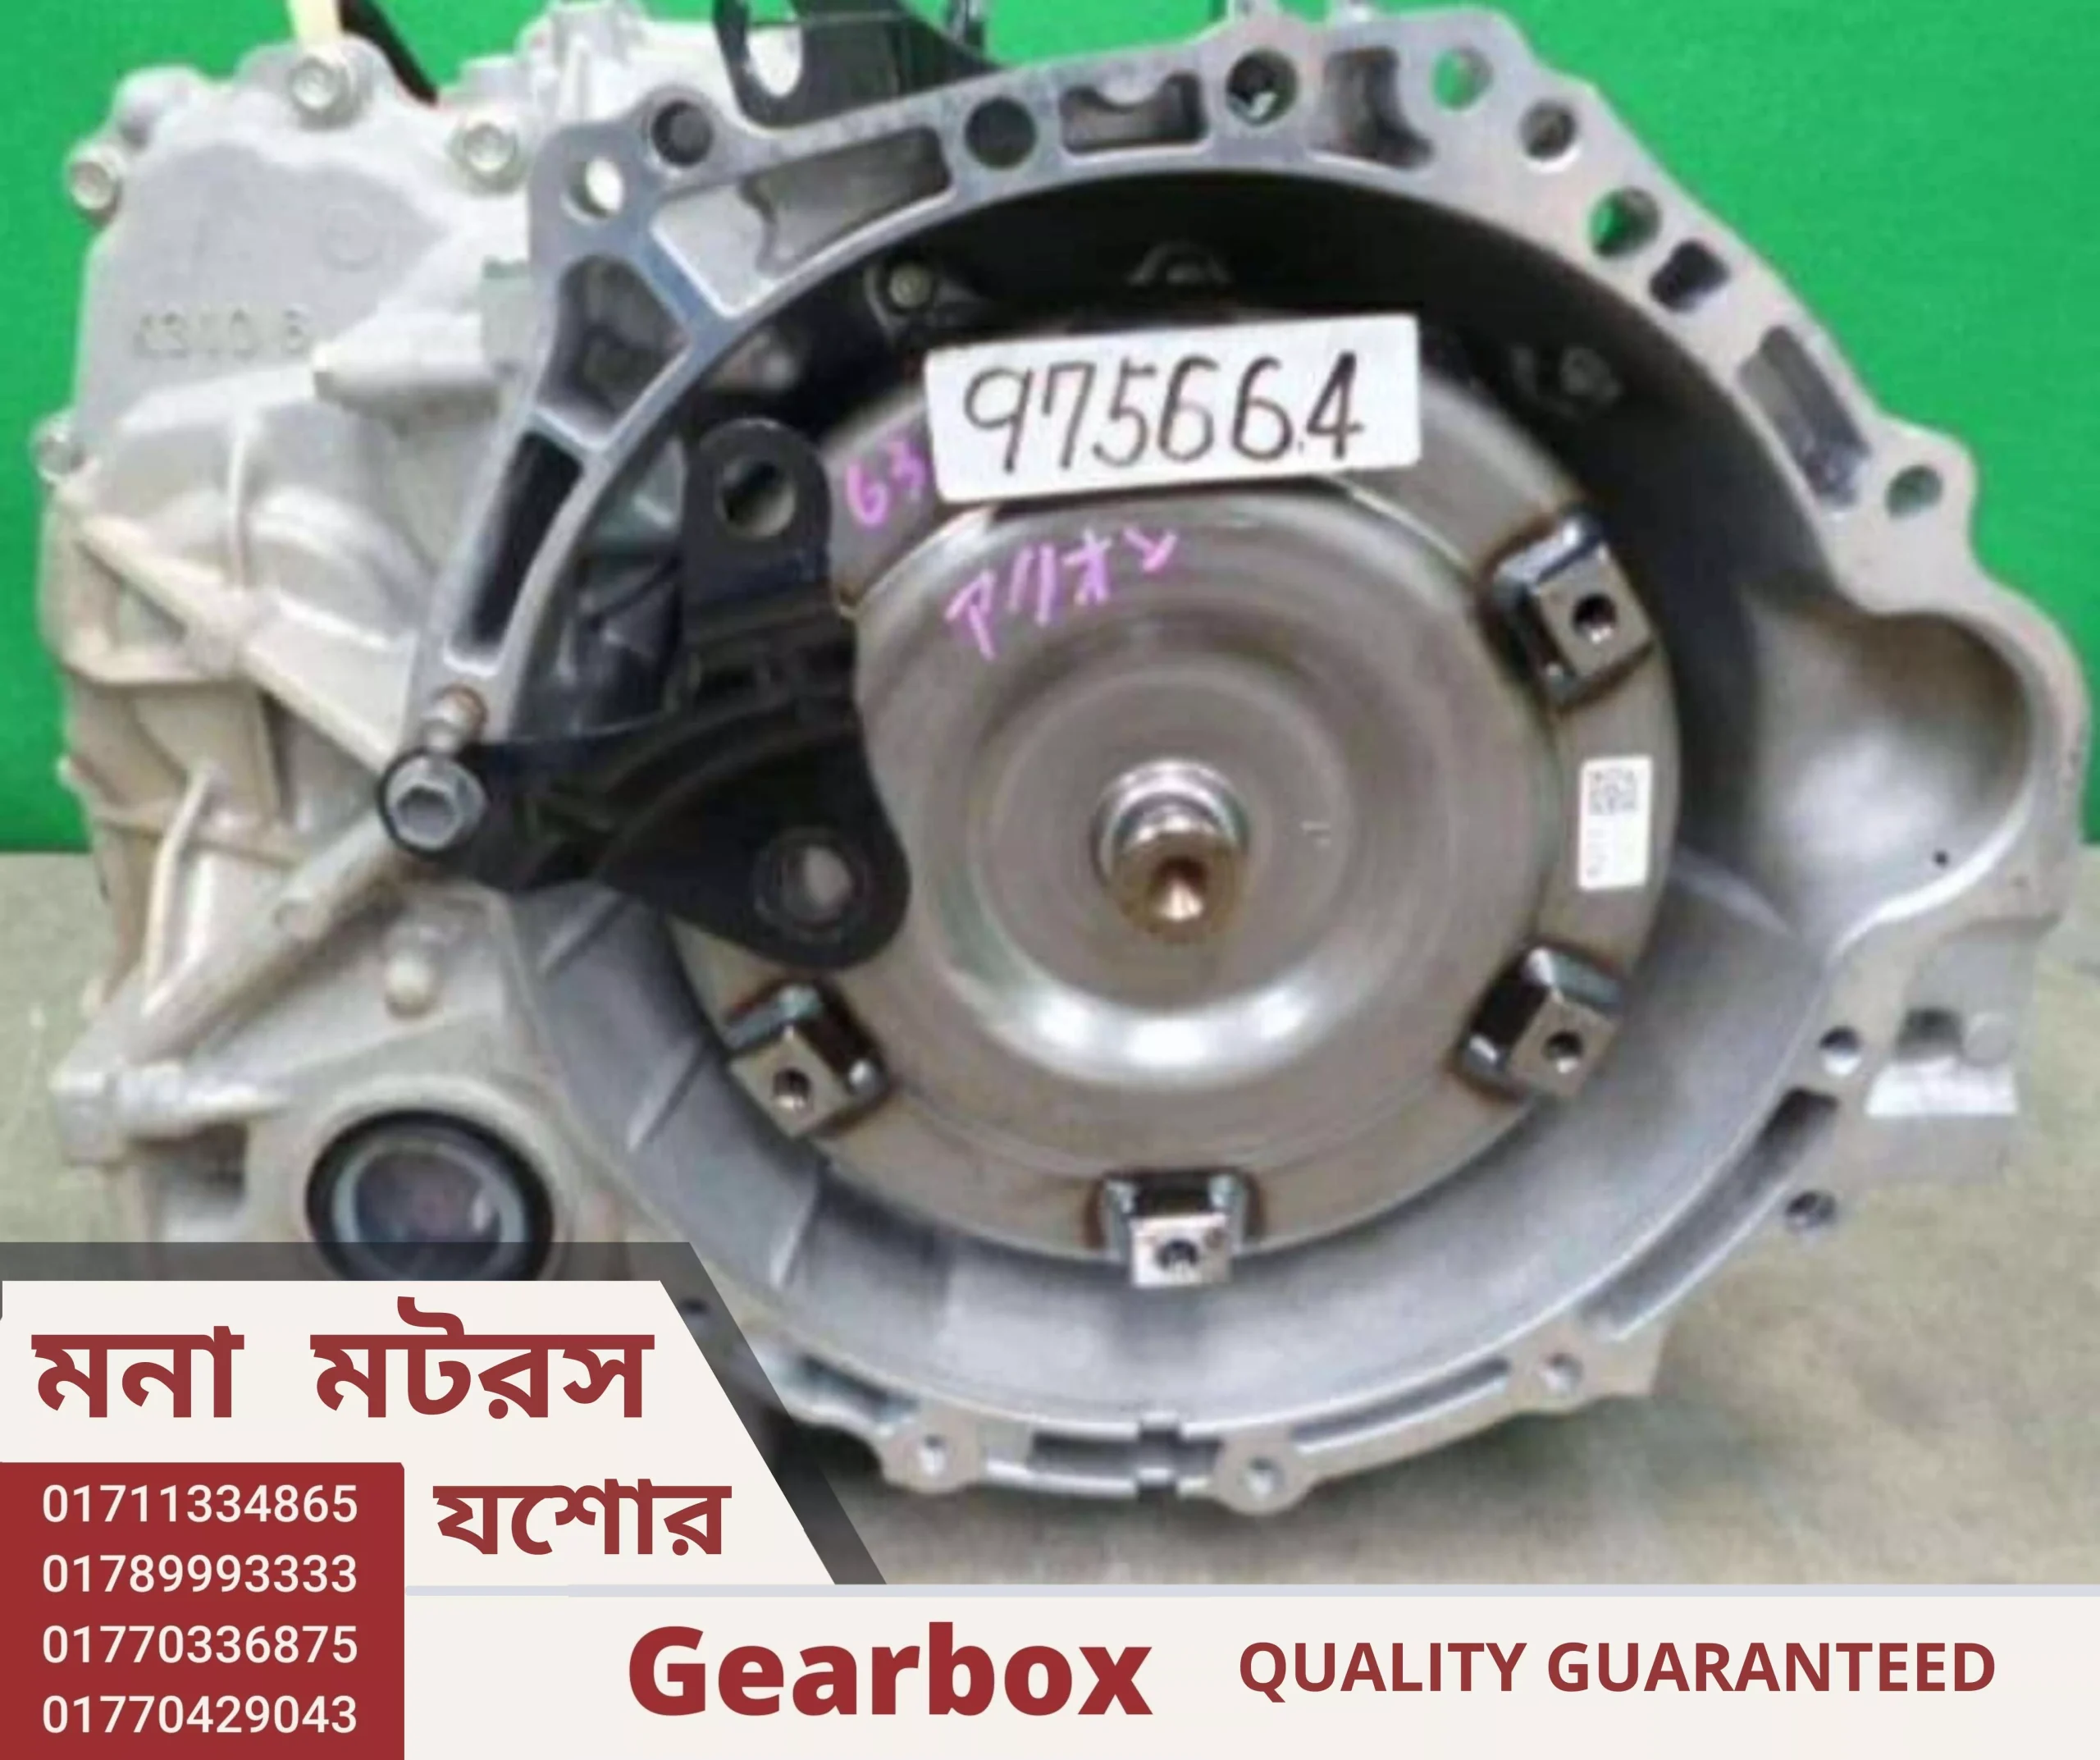 Gearbox 4 scaled